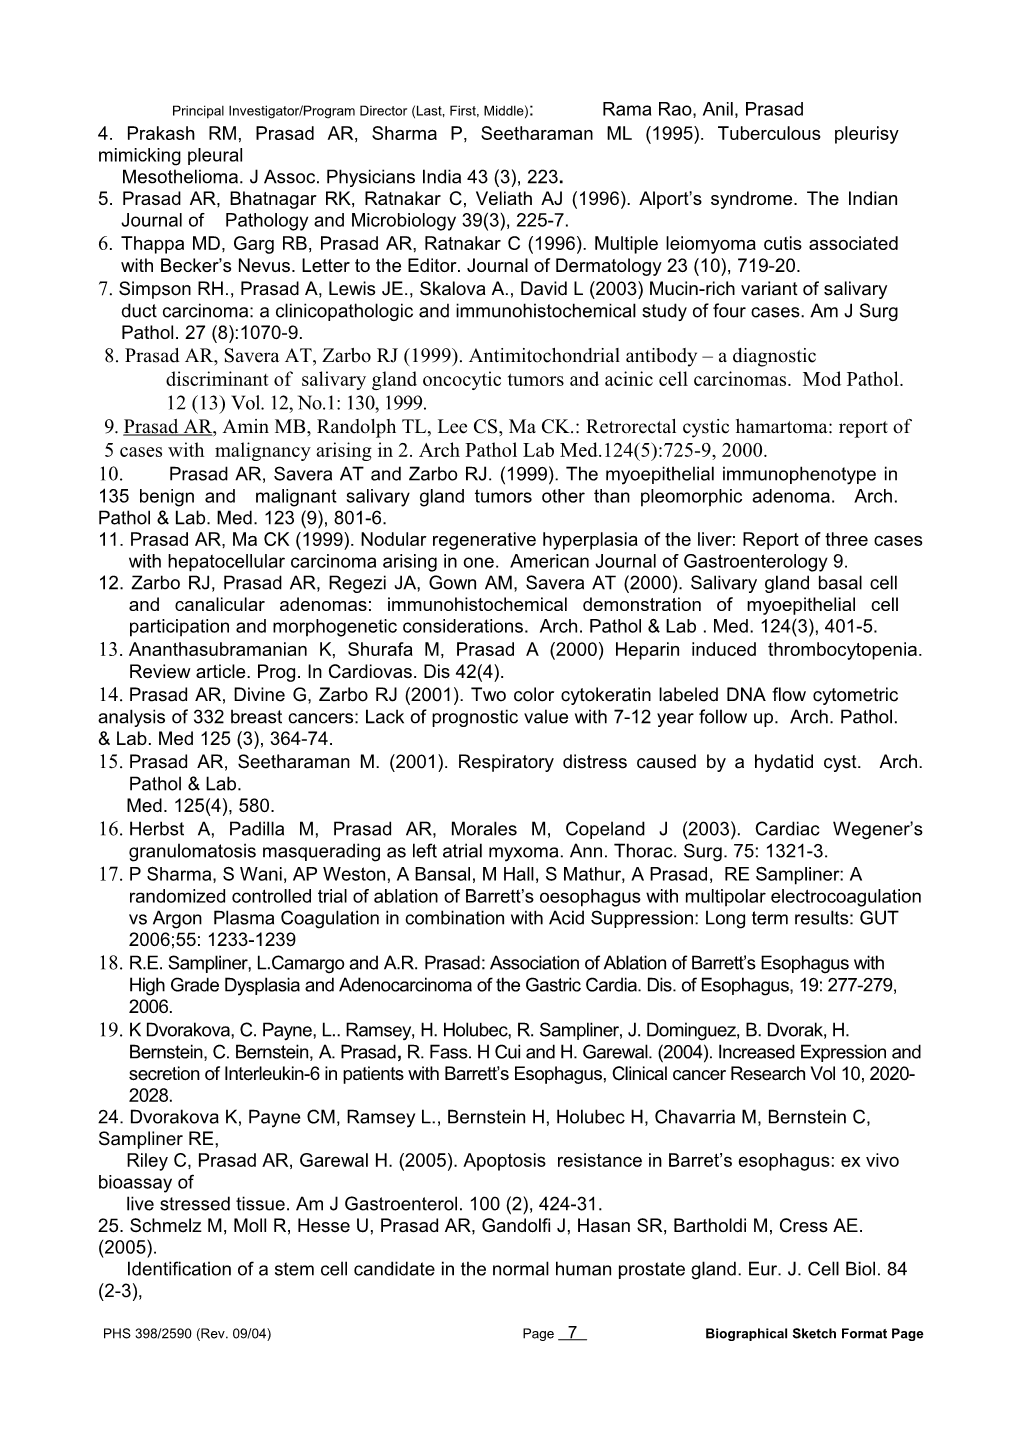 PHS 398 (Rev. 9/04), Biographical Sketch Format Page s16